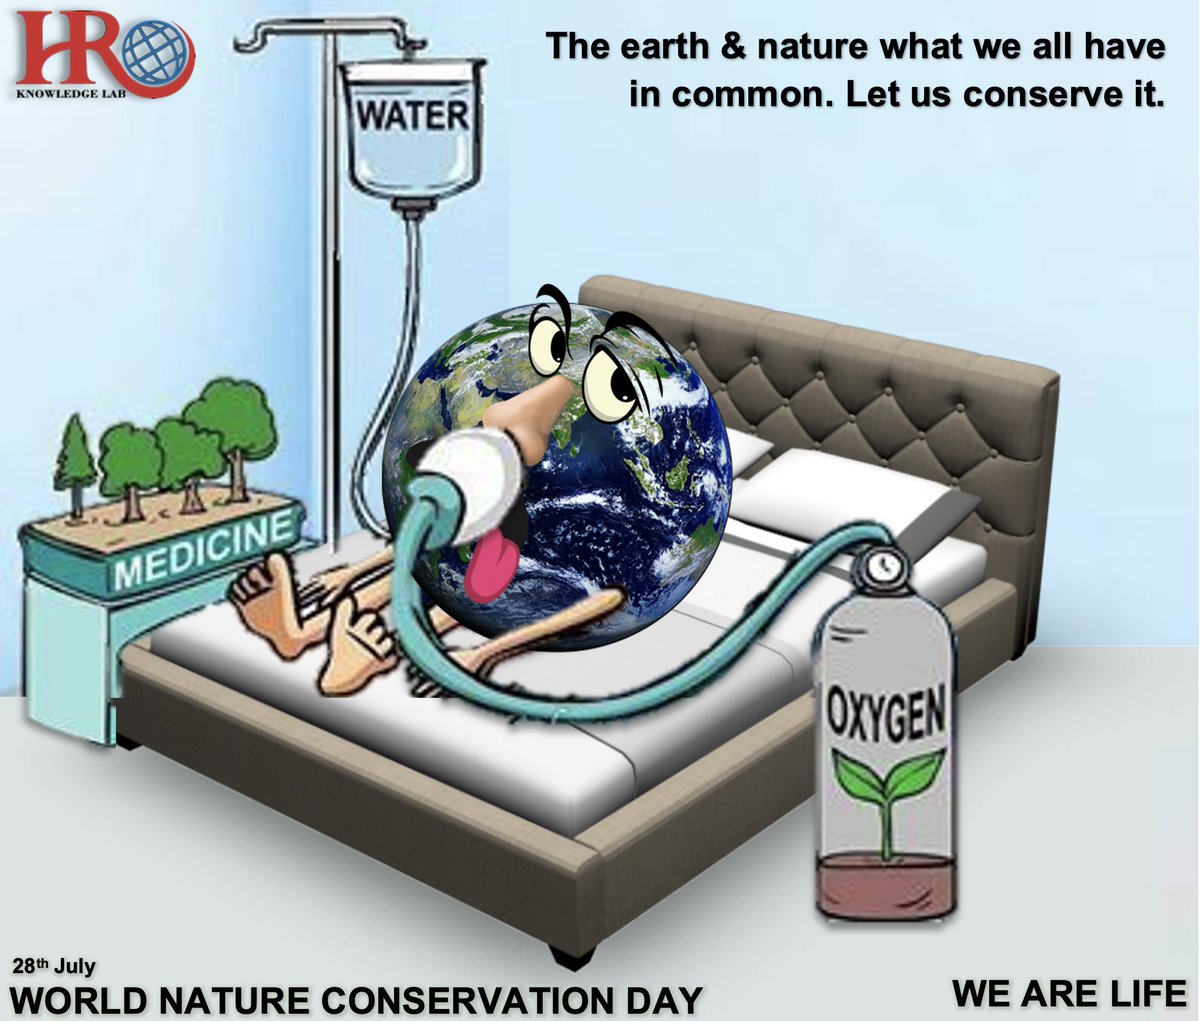 Those who conserve and preserve nature deserve to be part of nature #natureconservationday #hrknowledgelab #illustriouscircle #naturelovers #natureconservation #natureconservationists #natureconservationisimportantthough #WorldNatureConservationDay #worldnatureconservationday2023